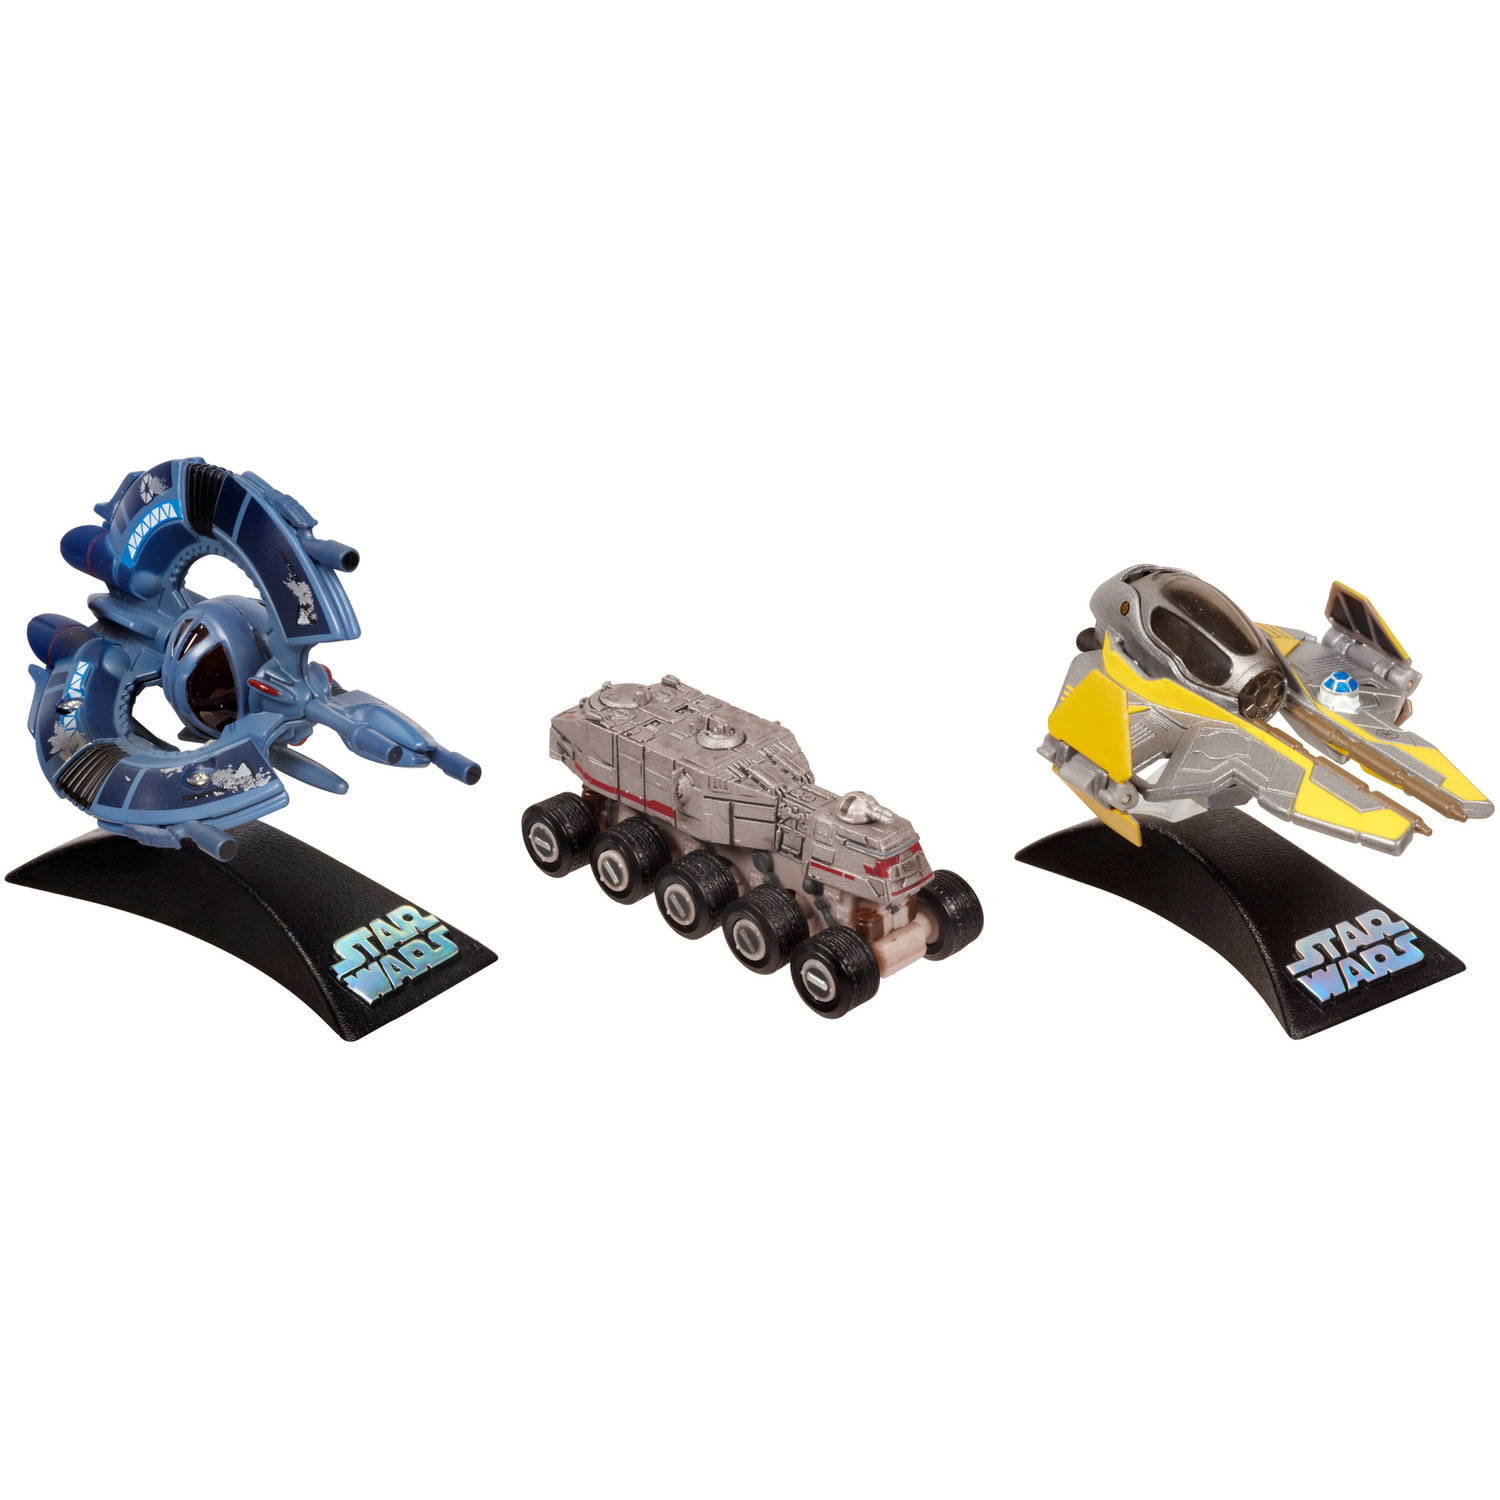 You Choose! Details about   Star Wars The Black Titanium Series Diecast Starships 